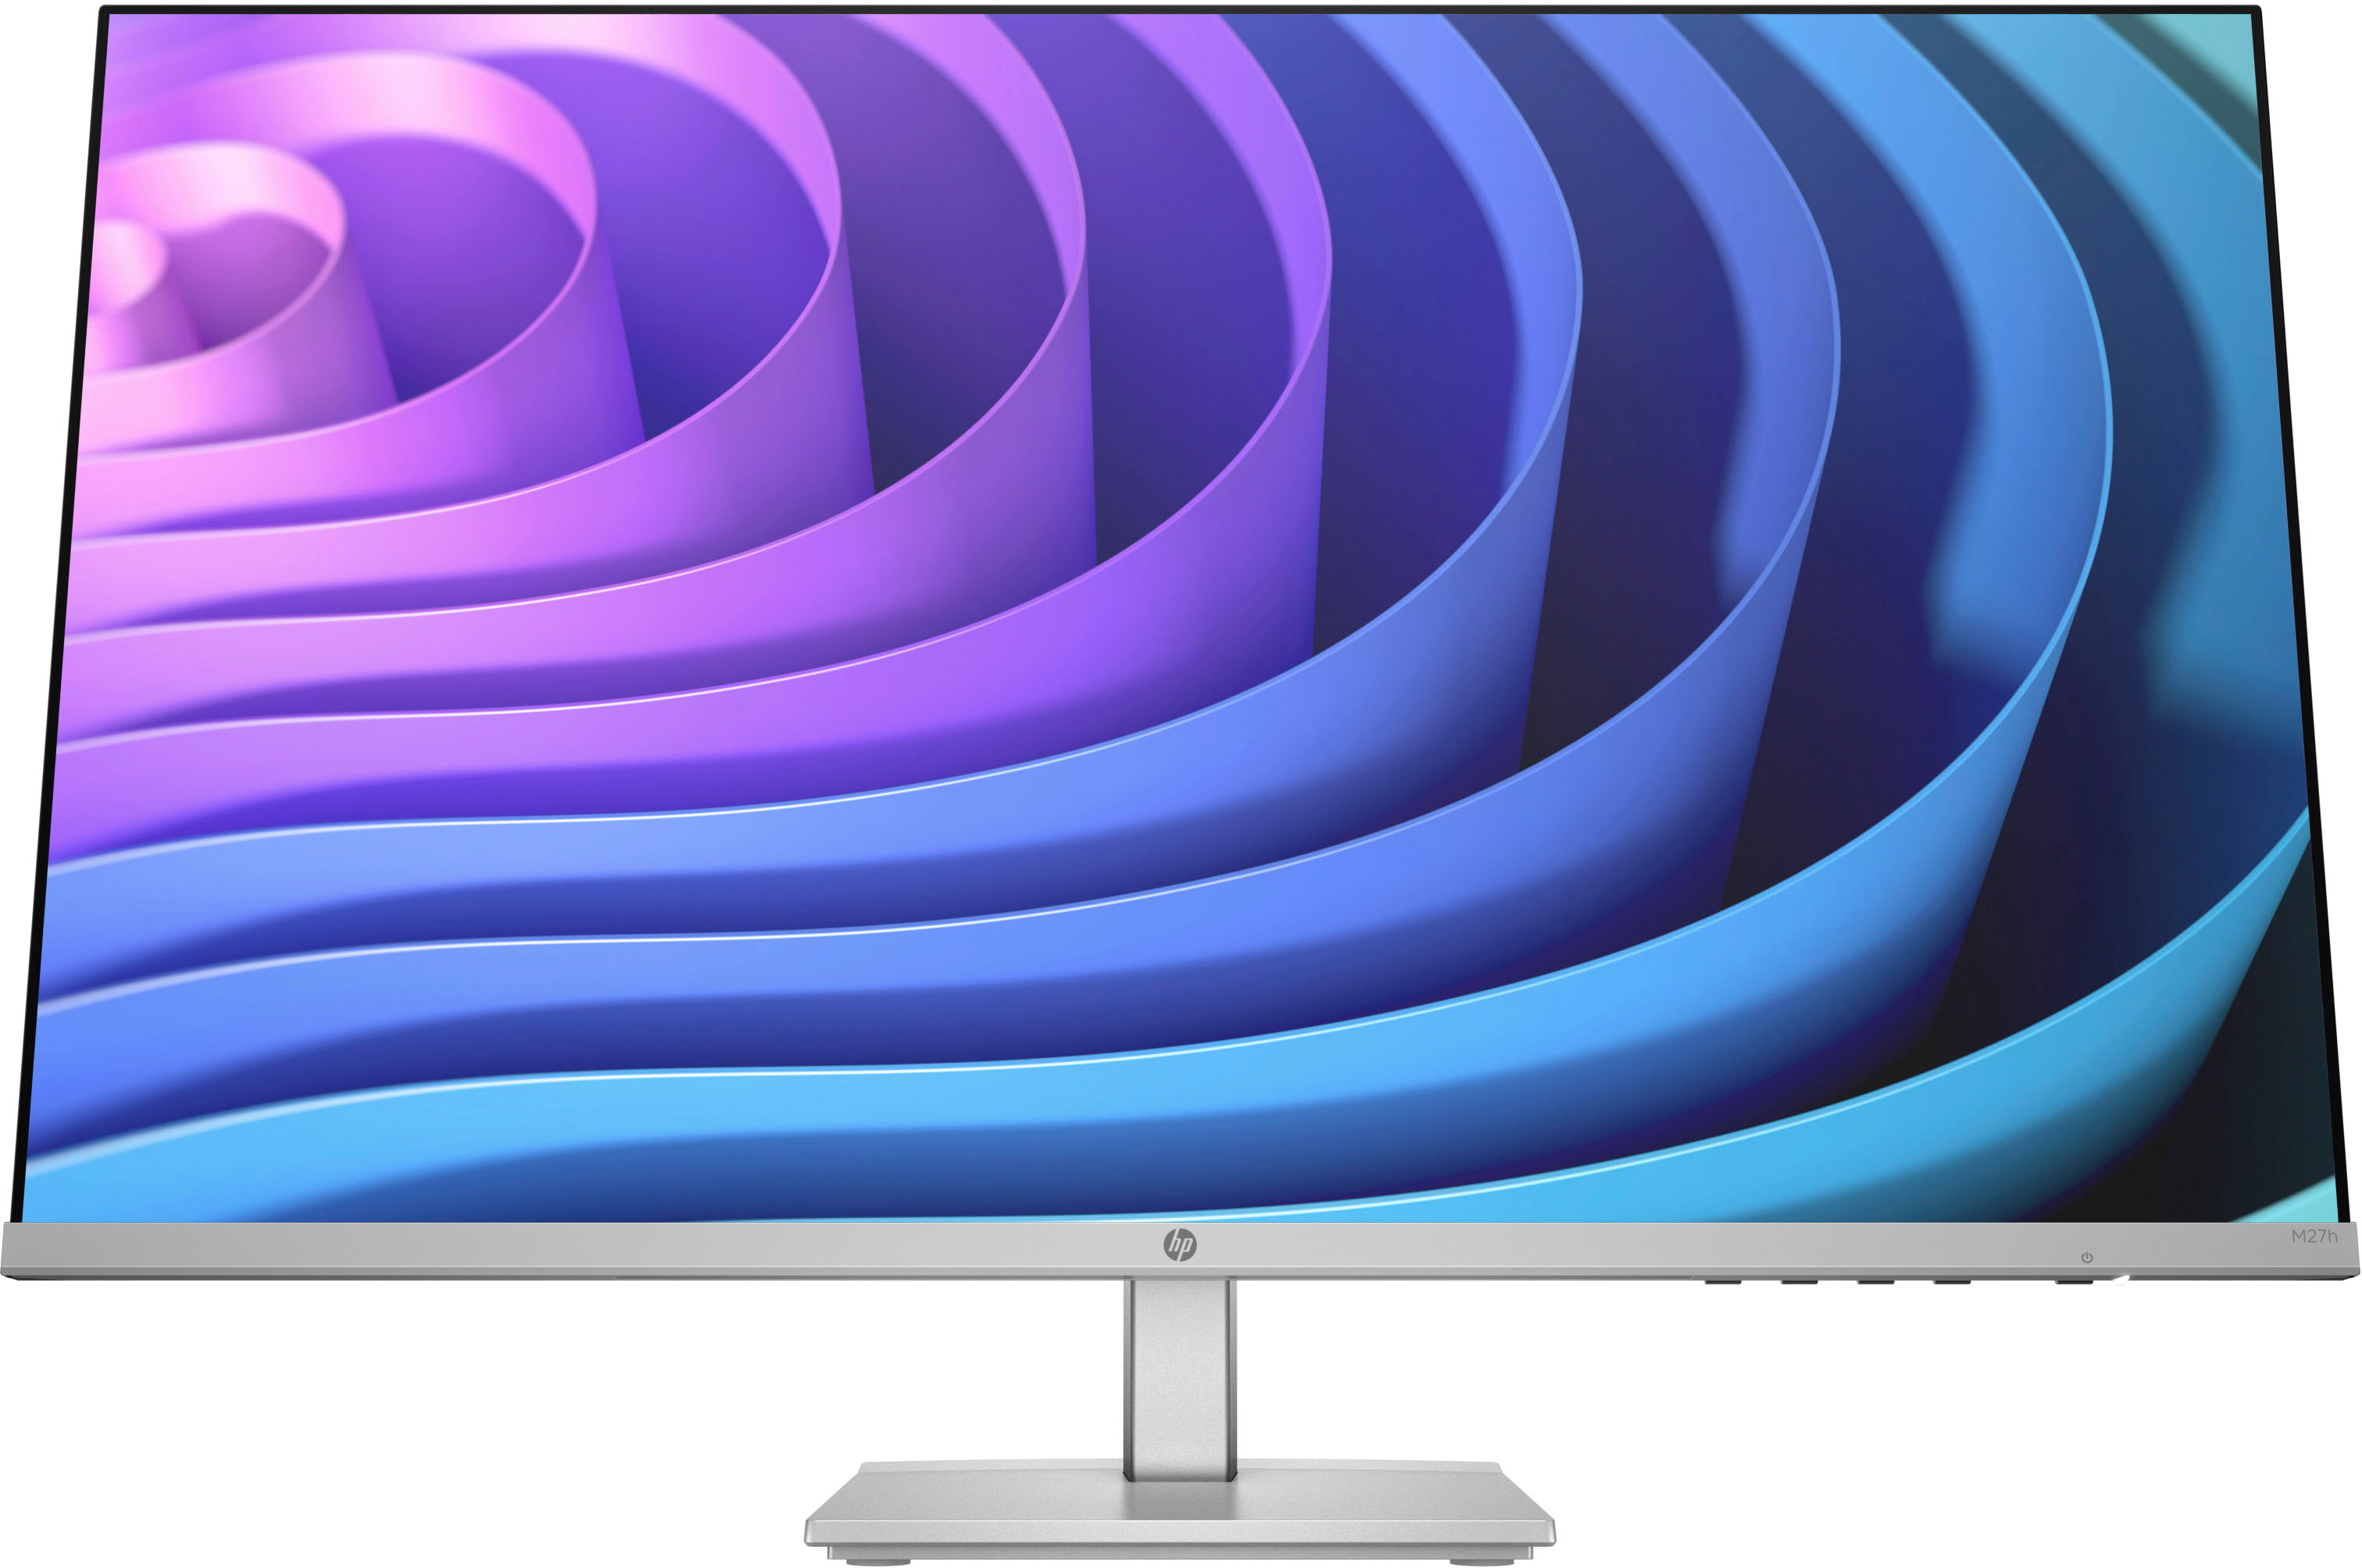 HP – 27″ IPS LED FHD FreeSync Monitor with Adjustable Height (HDMI, VGA) – Silver & Black